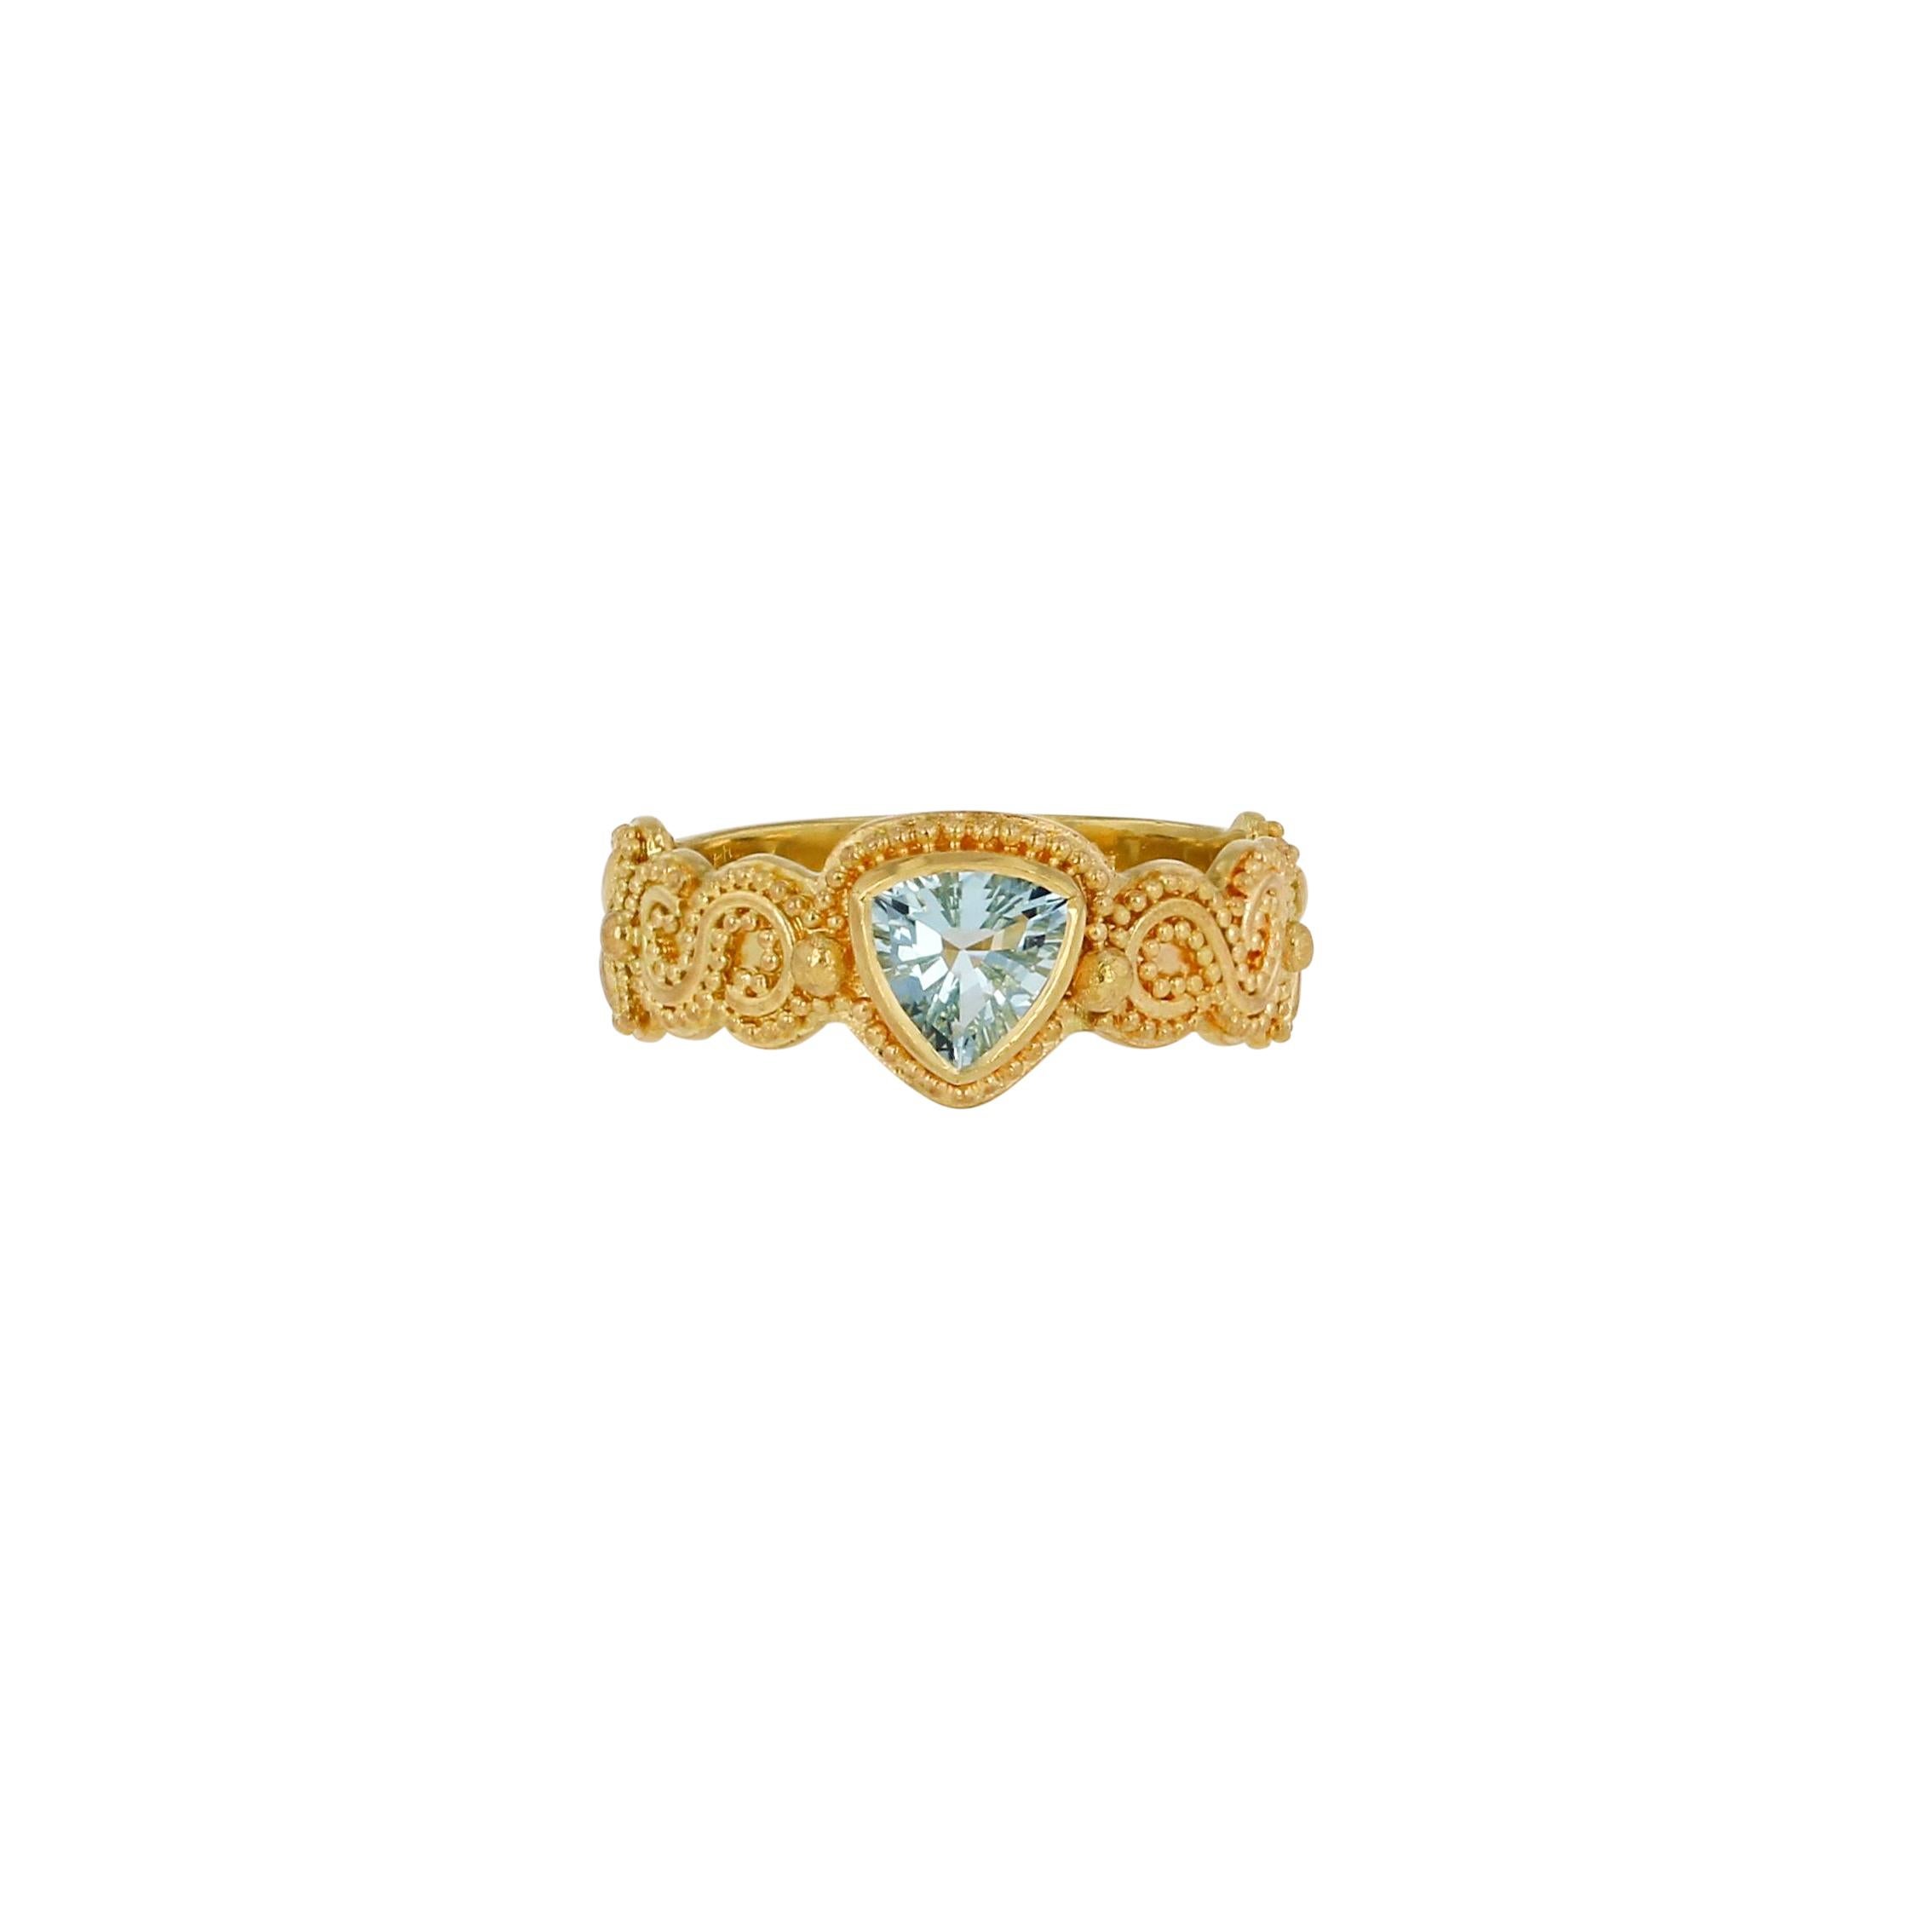 This sweet Kent Raible one of a kind ring, with it's swirl and leaf pattern, and fine detail is set with a .98ct trillion cut Aquamarine. Fine gold granulation completes this wearable piece of art!

Unlike much “designer” jewelry made today, all